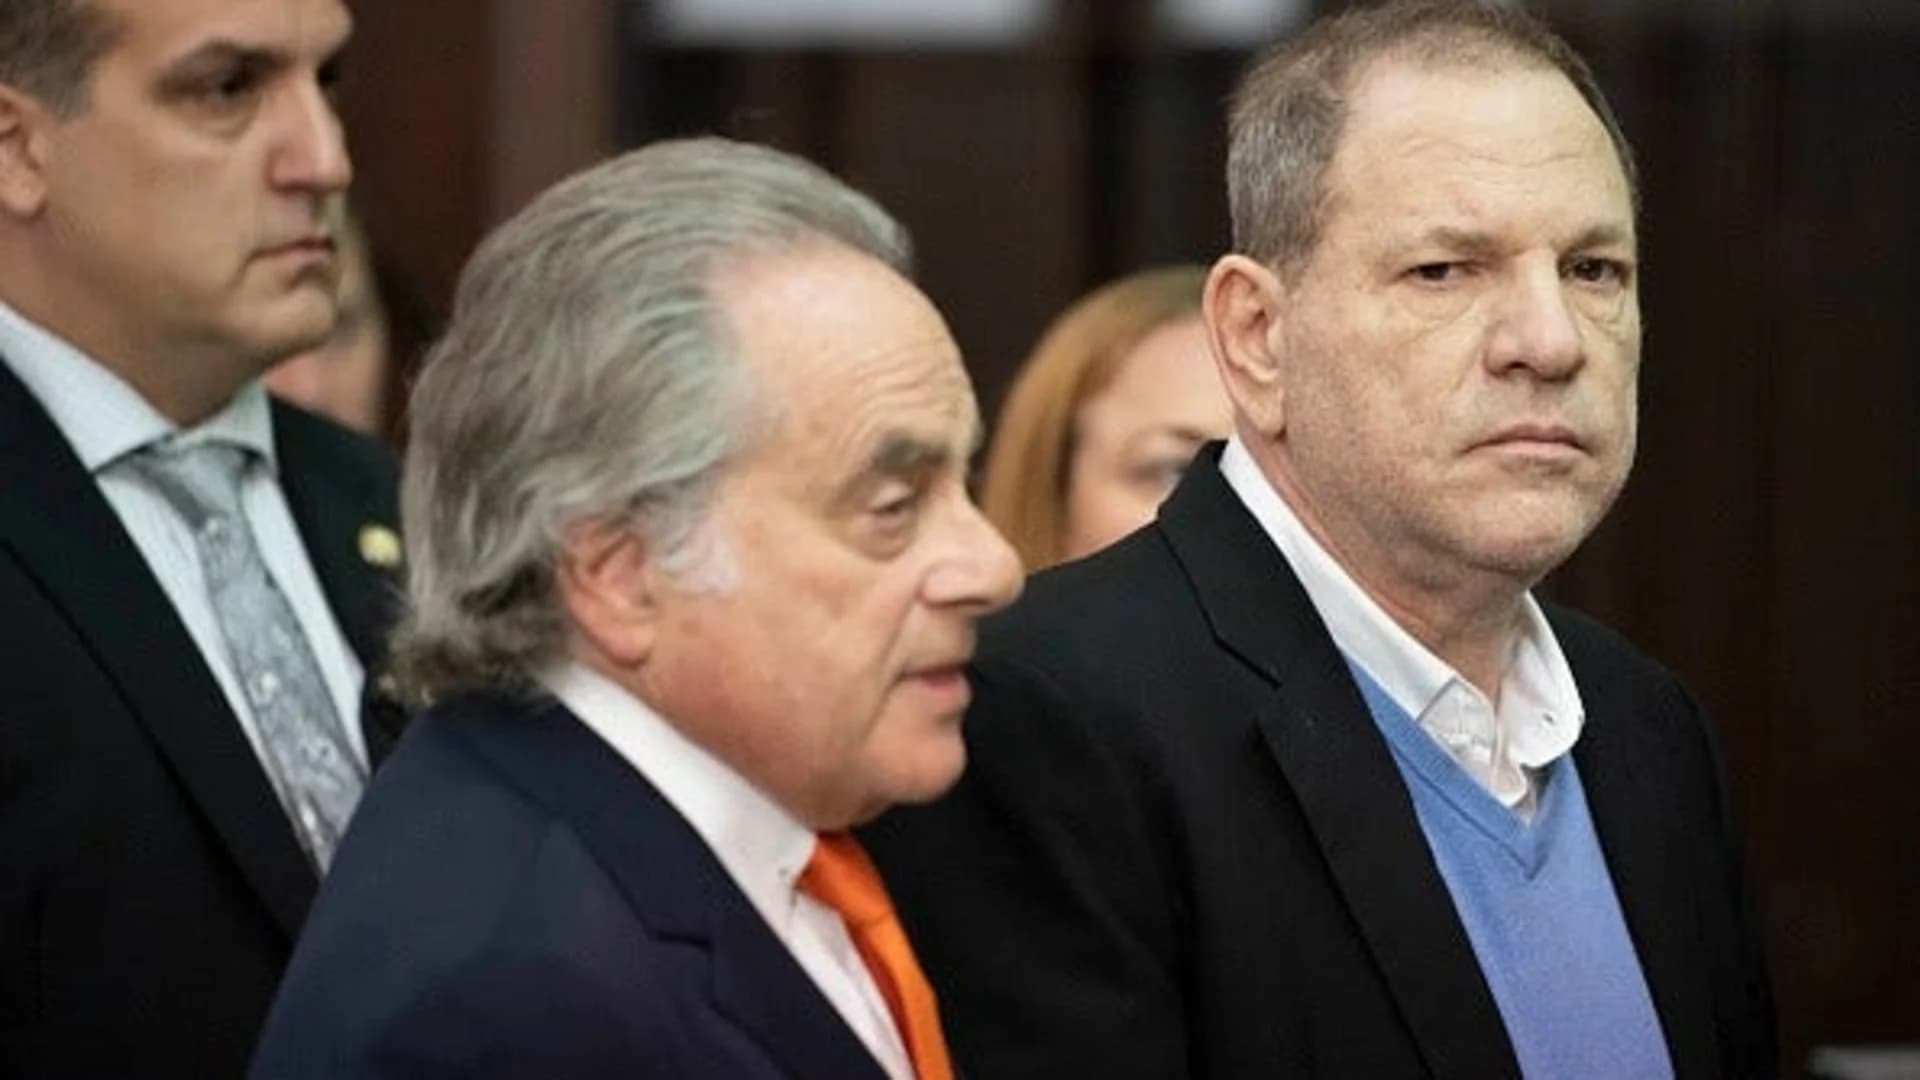 #N12BX: Harvey Weinstein turns self into NYPD